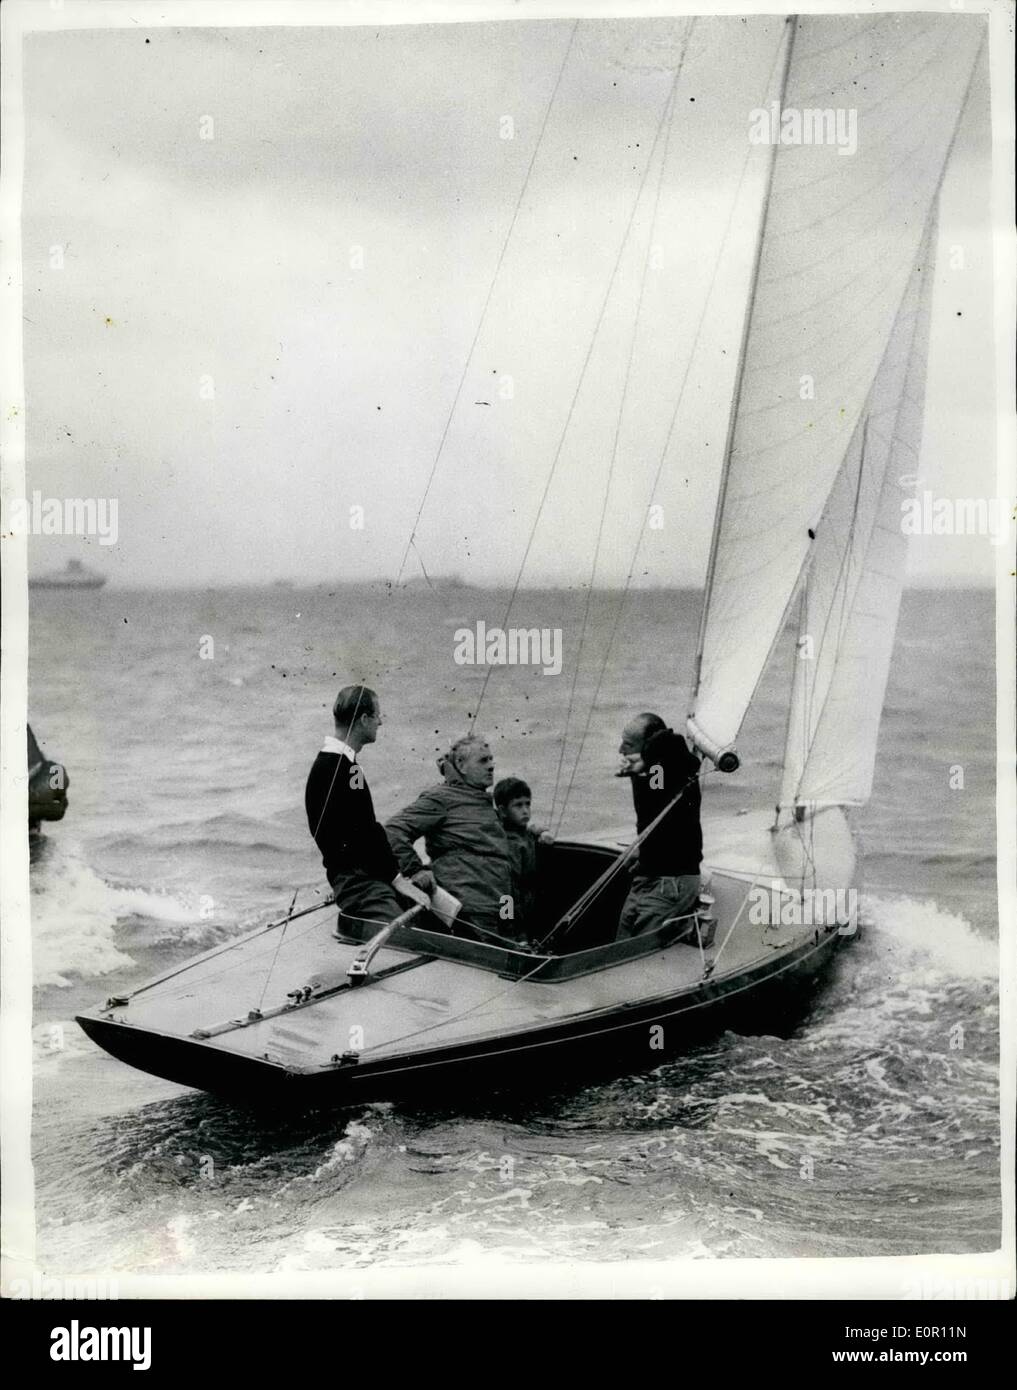 Aug. 08, 1957 - Prince Charles goes yacht racing with his father at Cowes. Prince Charles accompanied his father, The Duke of Edinburgh, in the ''Bluebottle'', which is owned by the Duke and the Queen- -when competing in a dragon class race, in the Cowes Regatta today. Photo shows Prince Charles seen with his father the Duke of Edinburgh, and Mr. Uffa Fox, abroad the ''Bluebottle'' at Cowes today. Stock Photo